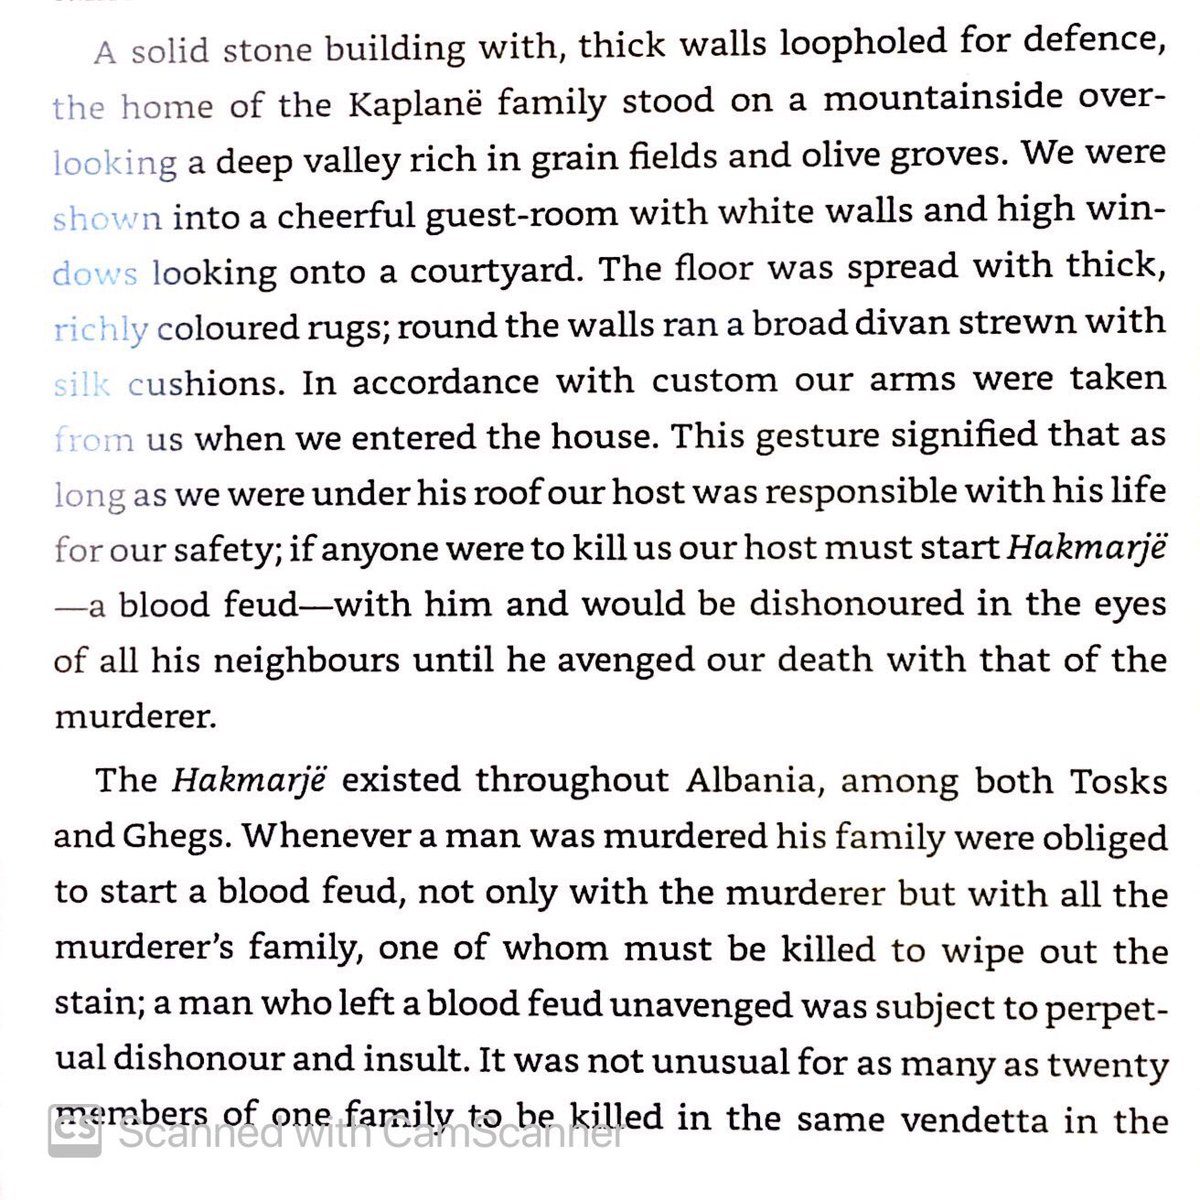 Blood feuds & guest protection were both taken extremely seriously by both Tosks & Ghegs. Feuds could carry on for generations & result in deaths of many family members.